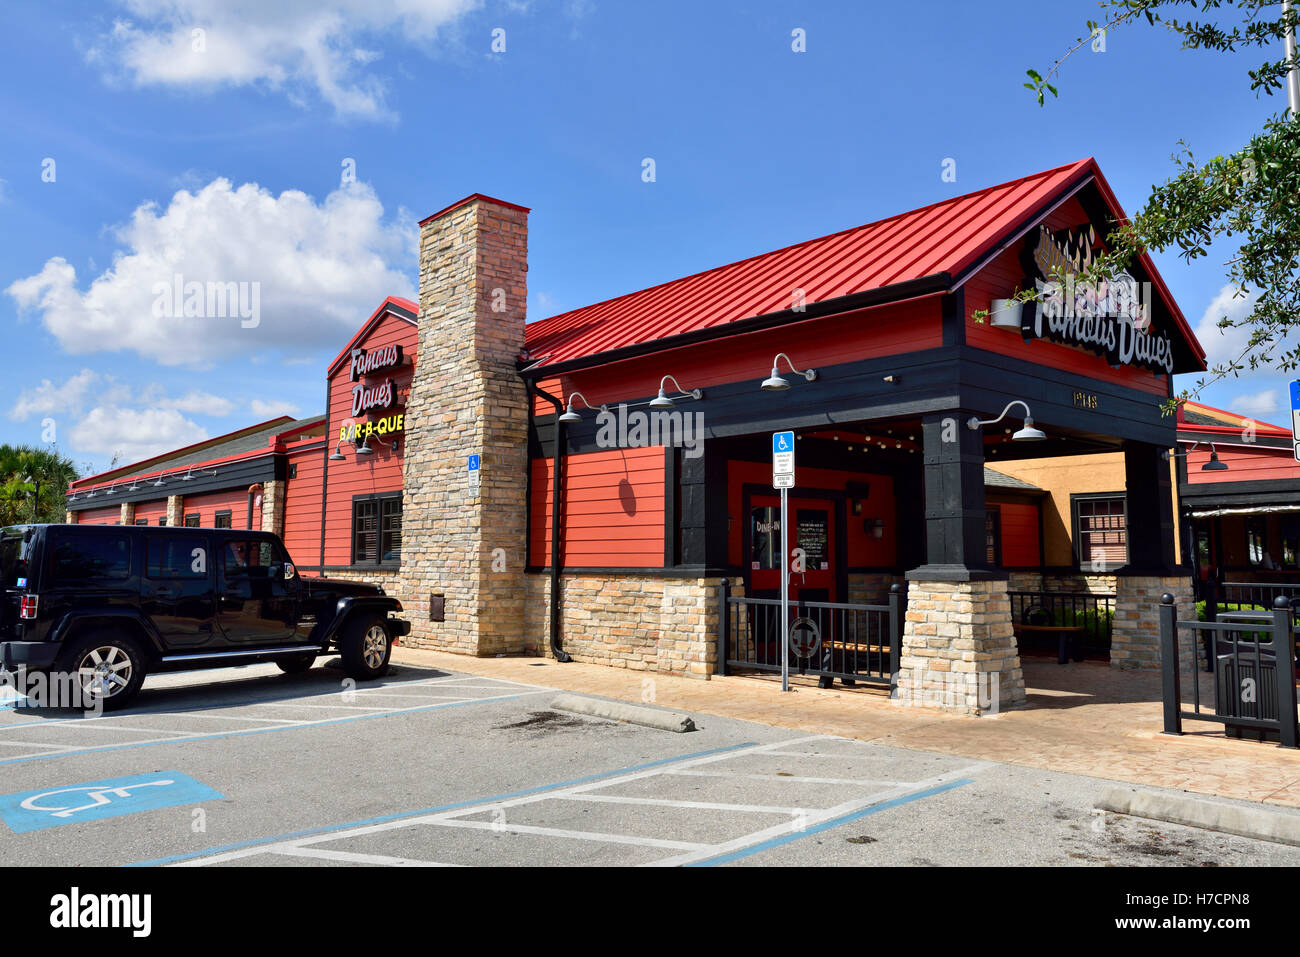 Famous Dave's Bar-B-Que restaurant, Fort Myers, FL Stock Photo